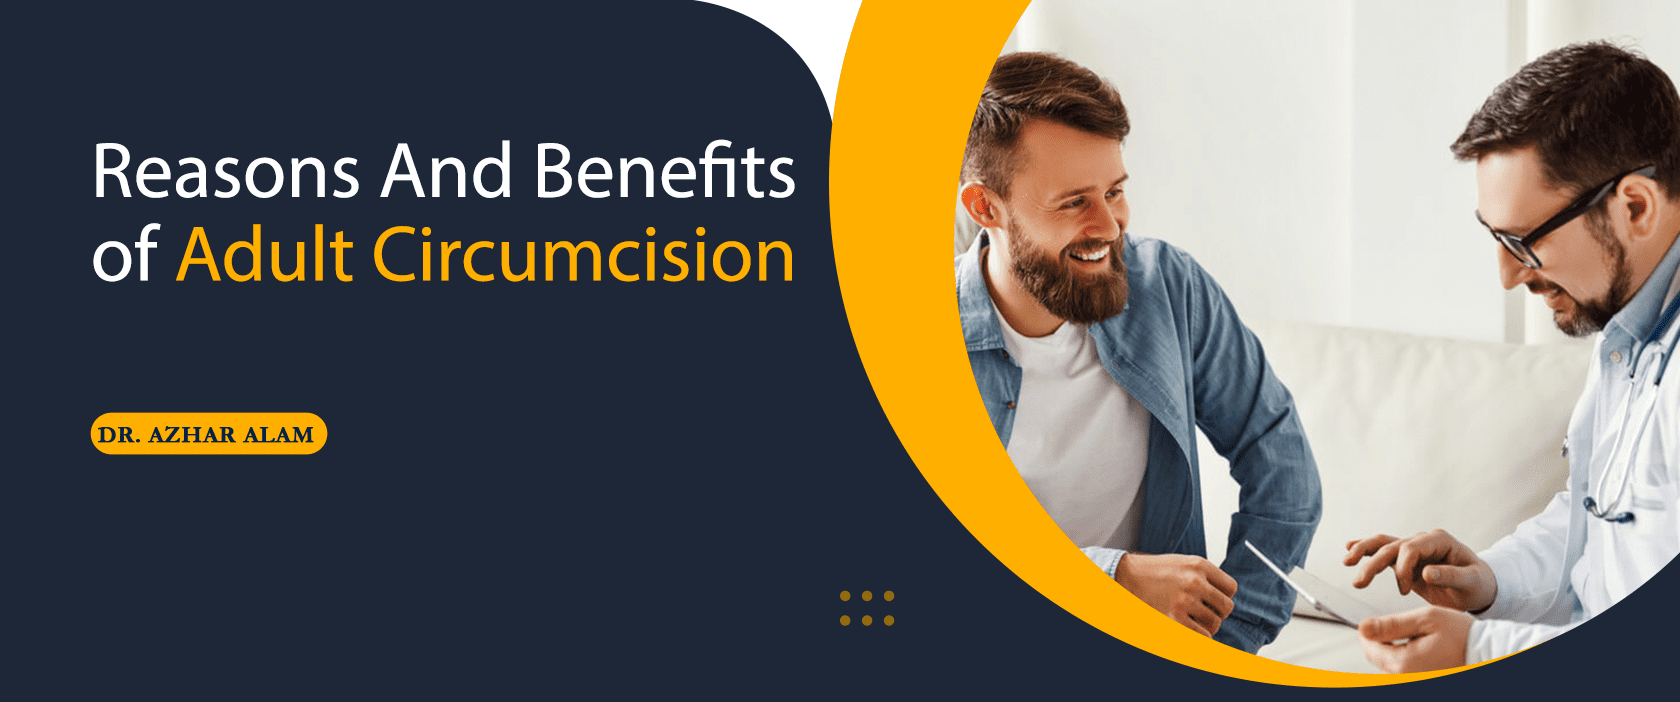 reasons and benefits of adult circumcision